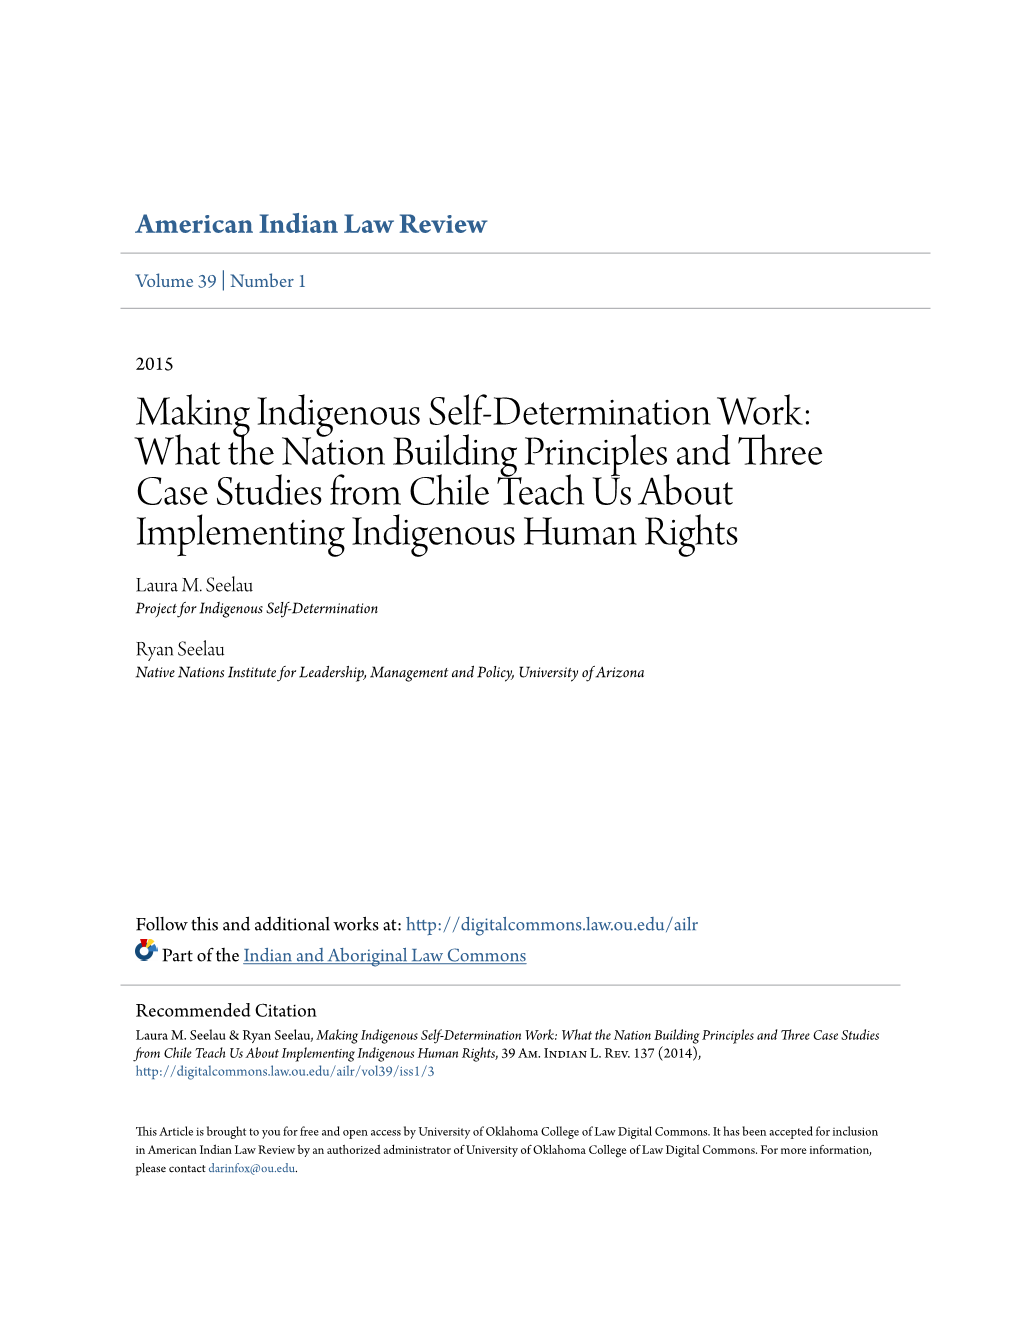 Making Indigenous Self-Determination Work: What The